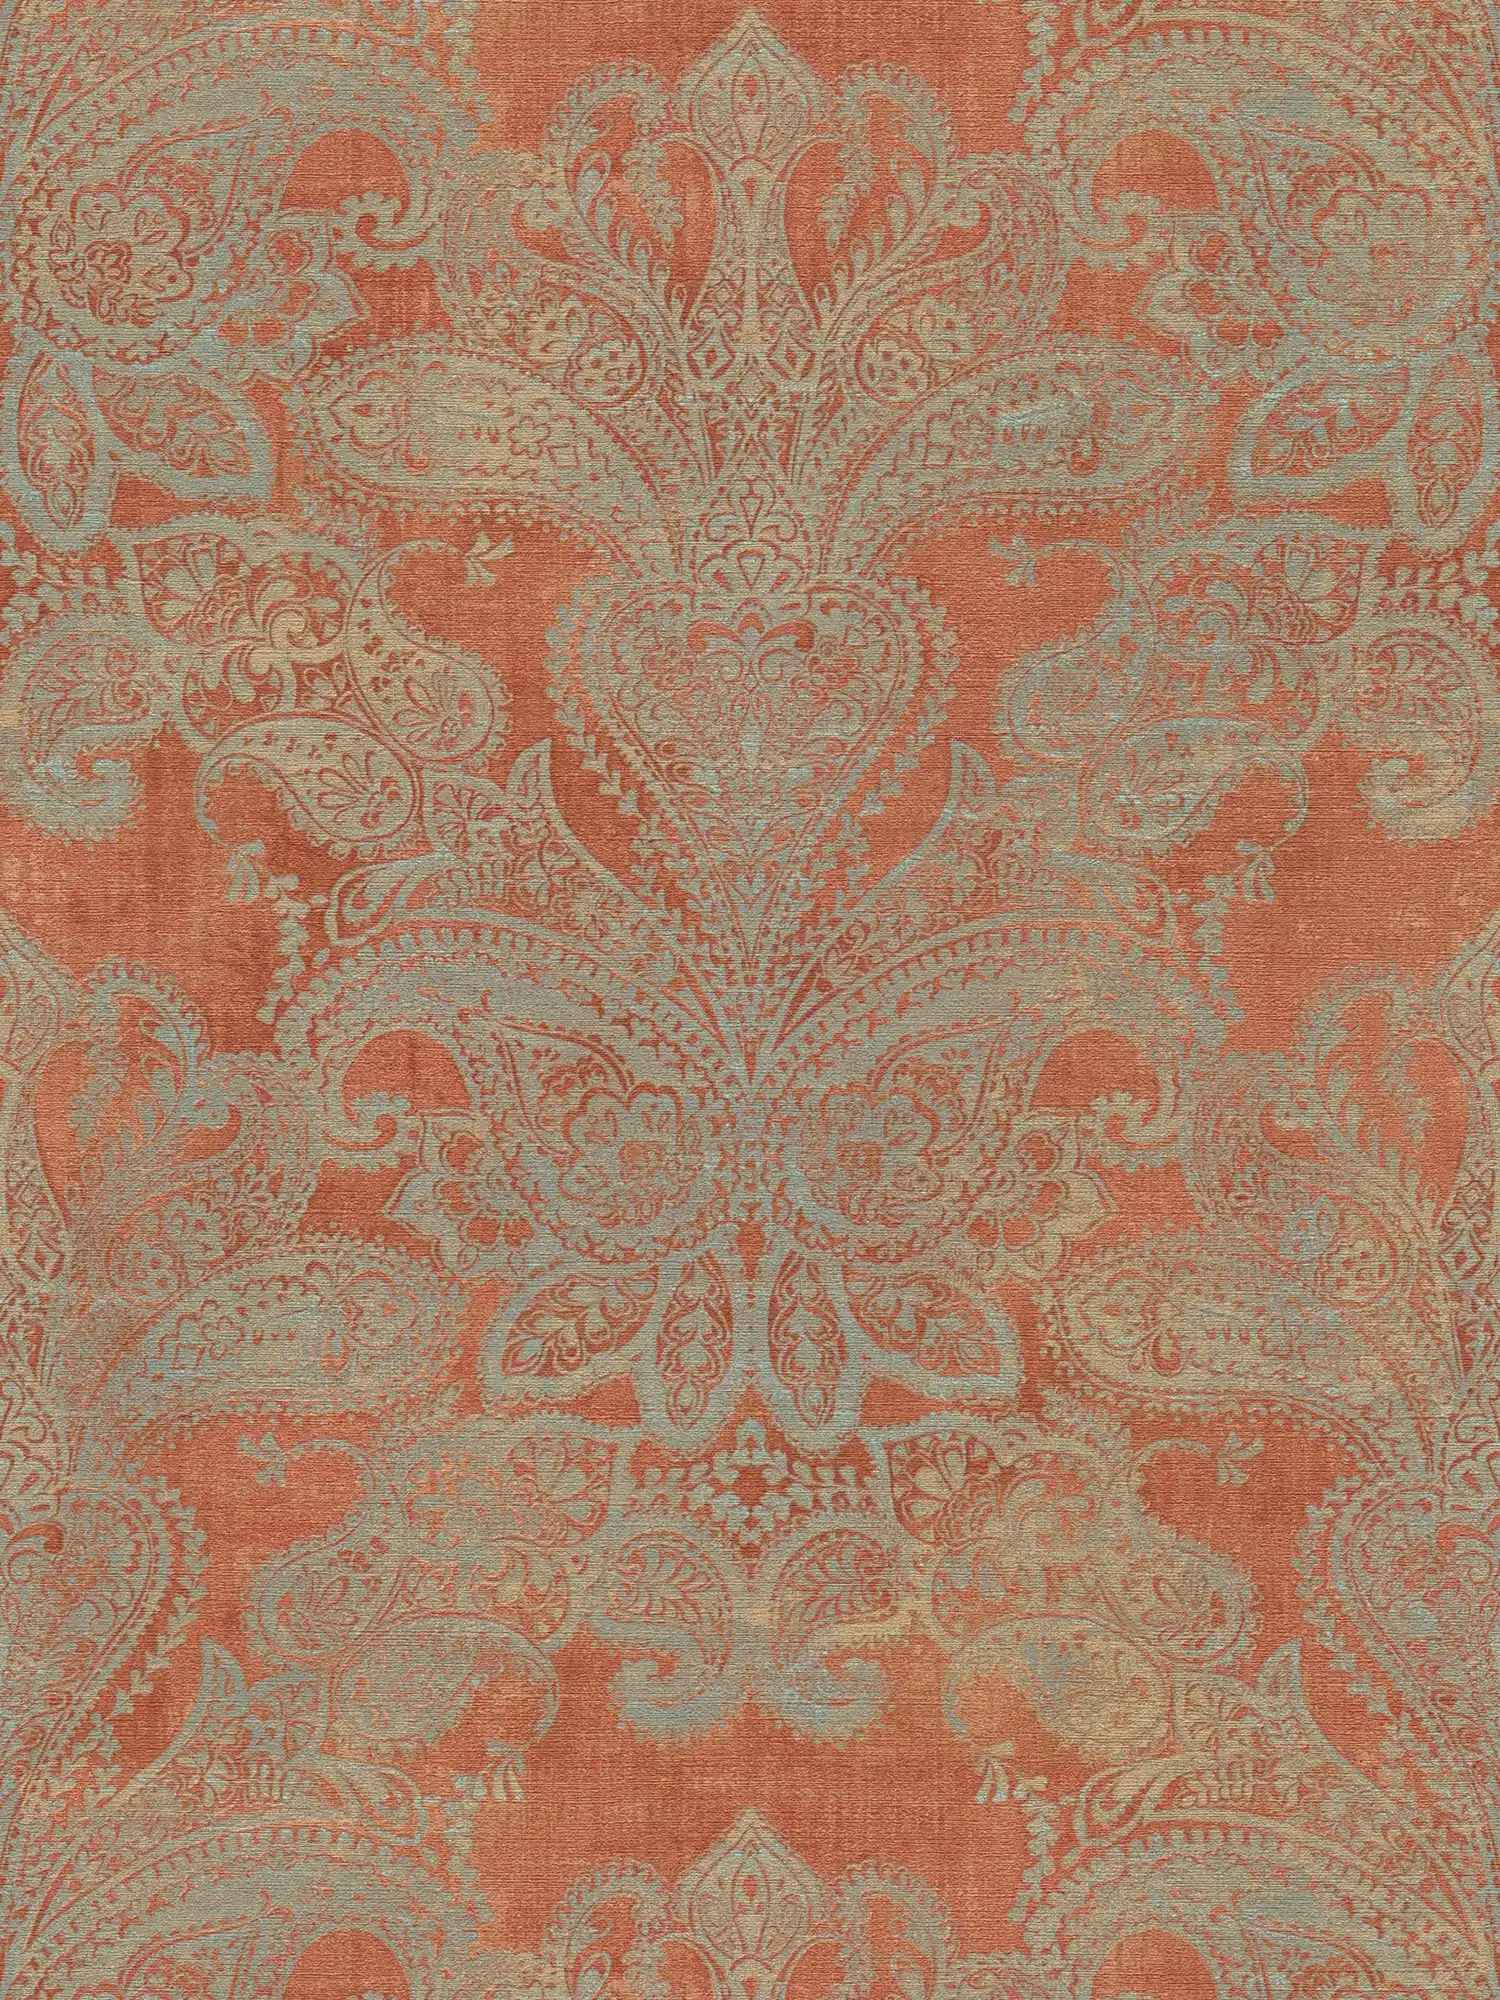         Non-woven wallpaper in baroque style with ornaments - orange, turquoise, grey
    